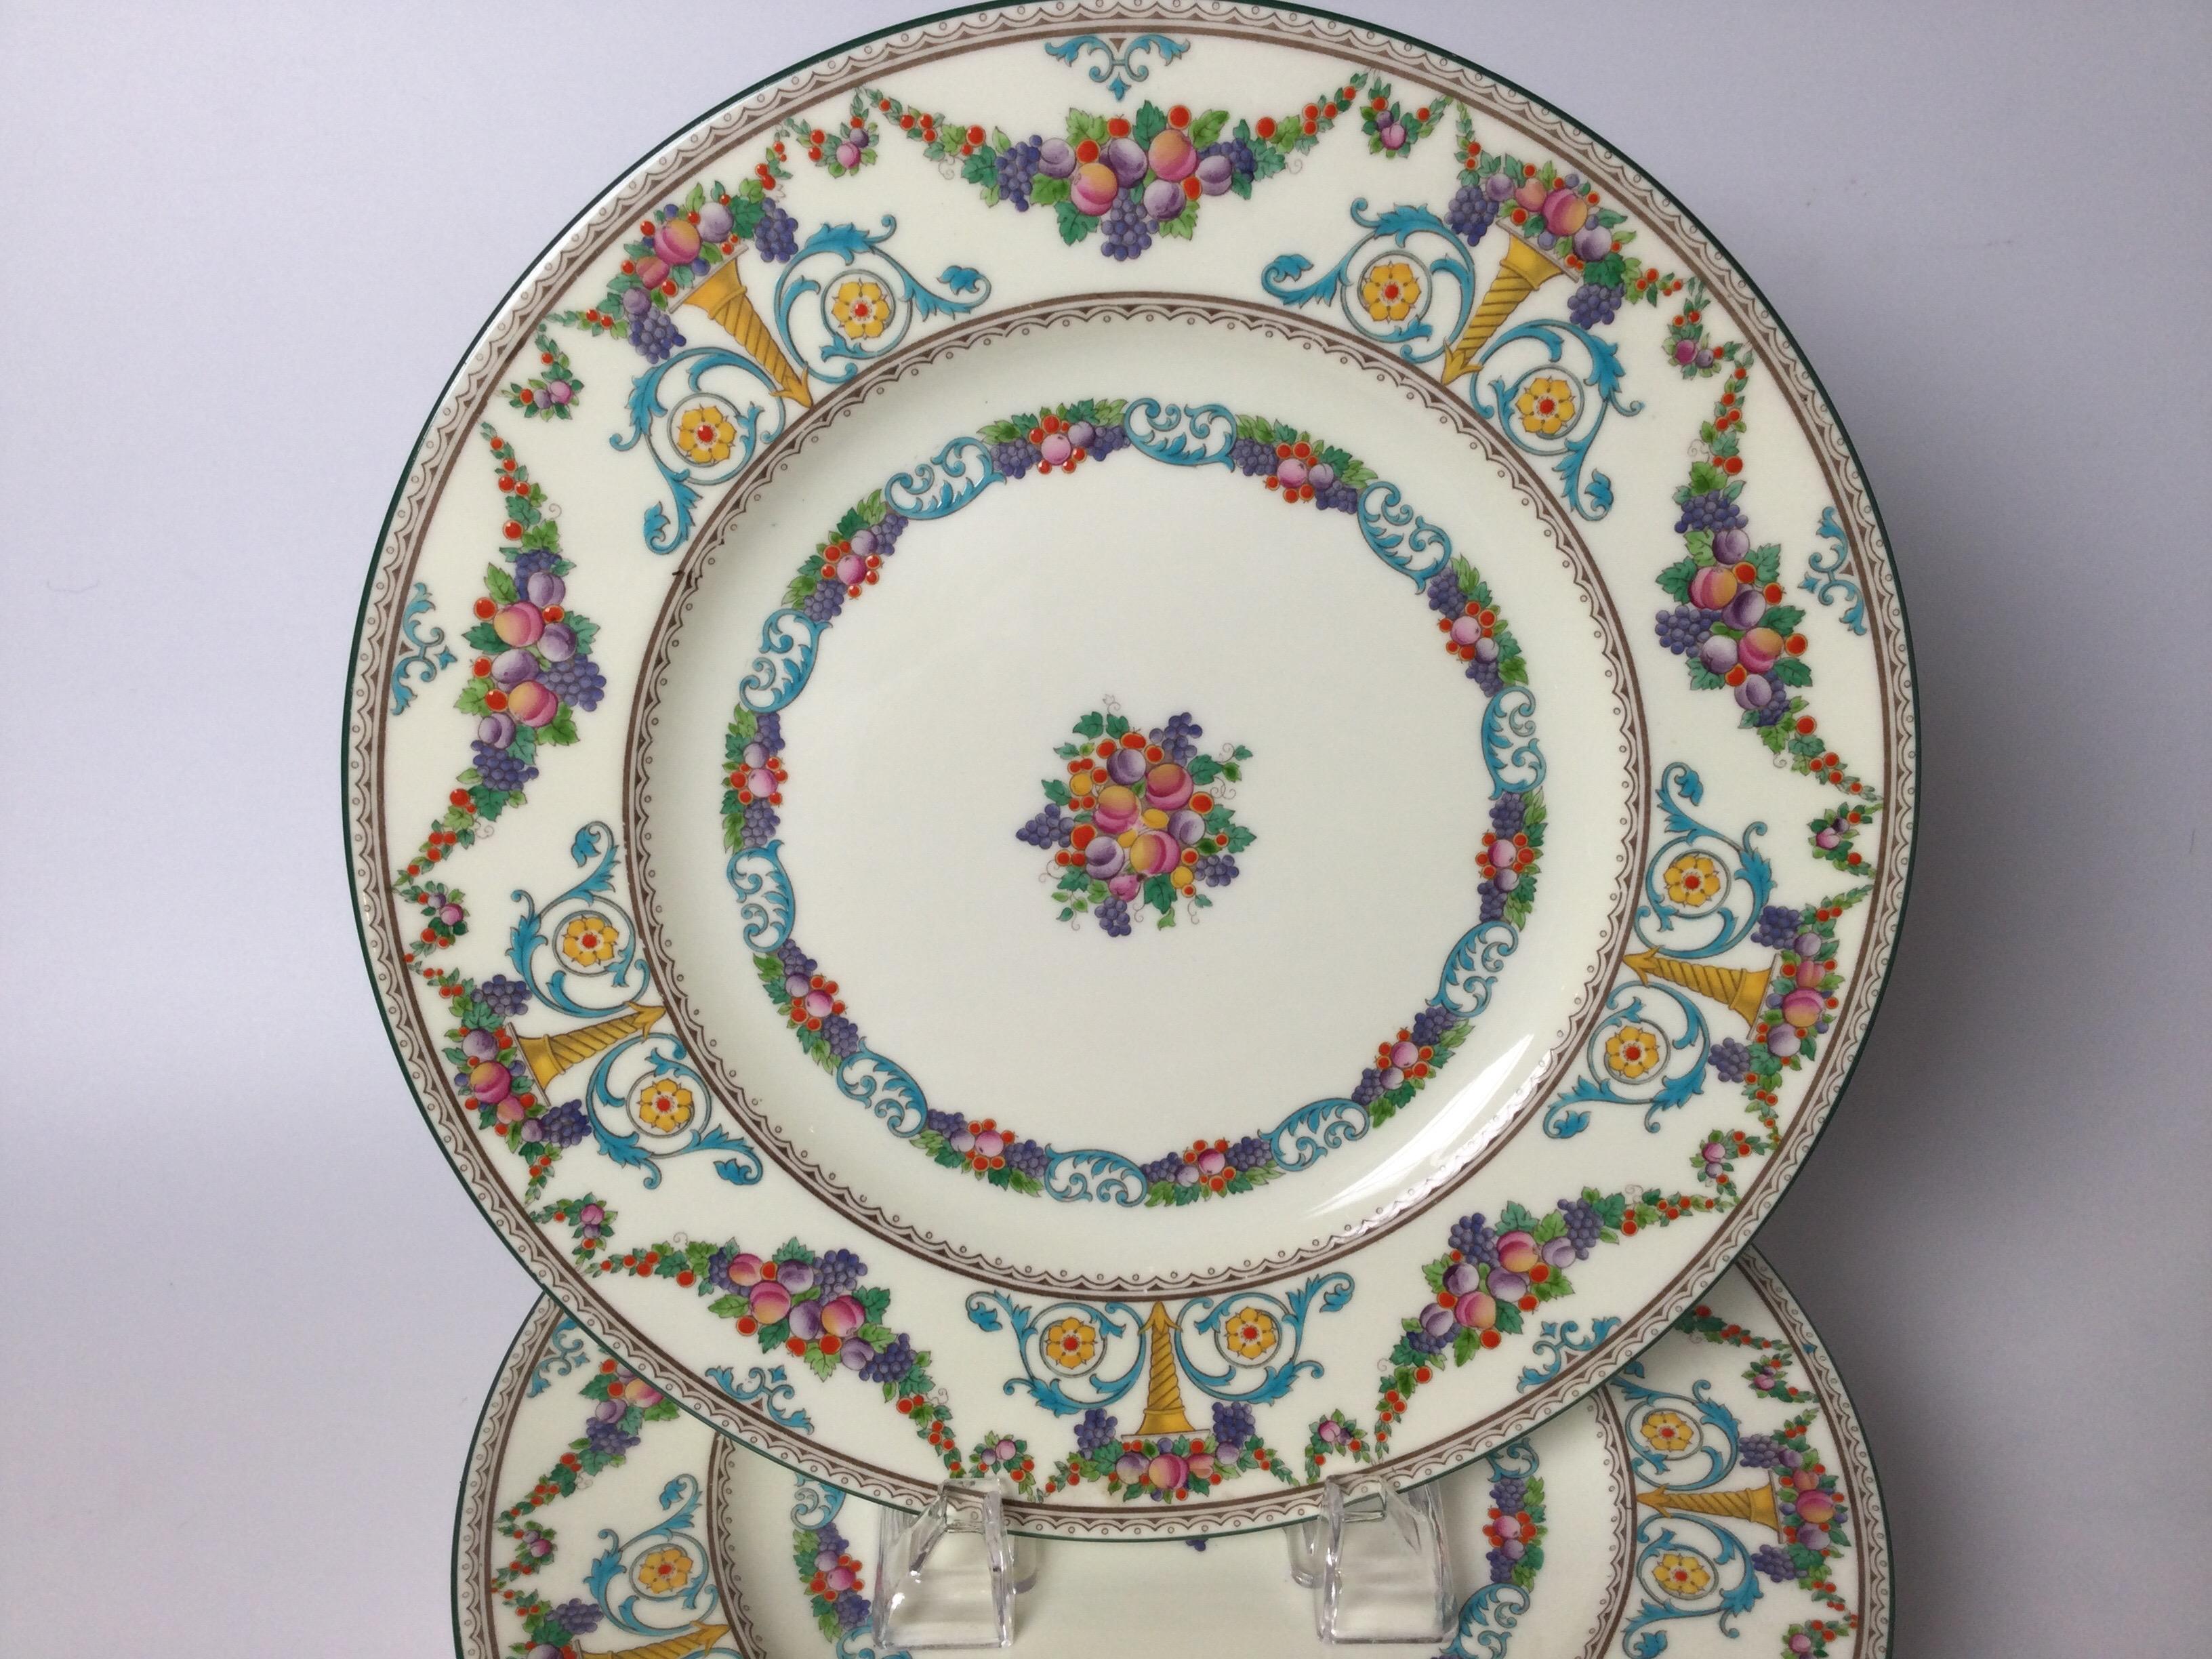 A set of 8 hand enameled service dinner plates. The vibrantly colored hand enameled and painted plates with garlands and uns of fuit a floral bouquets. England 1930s.